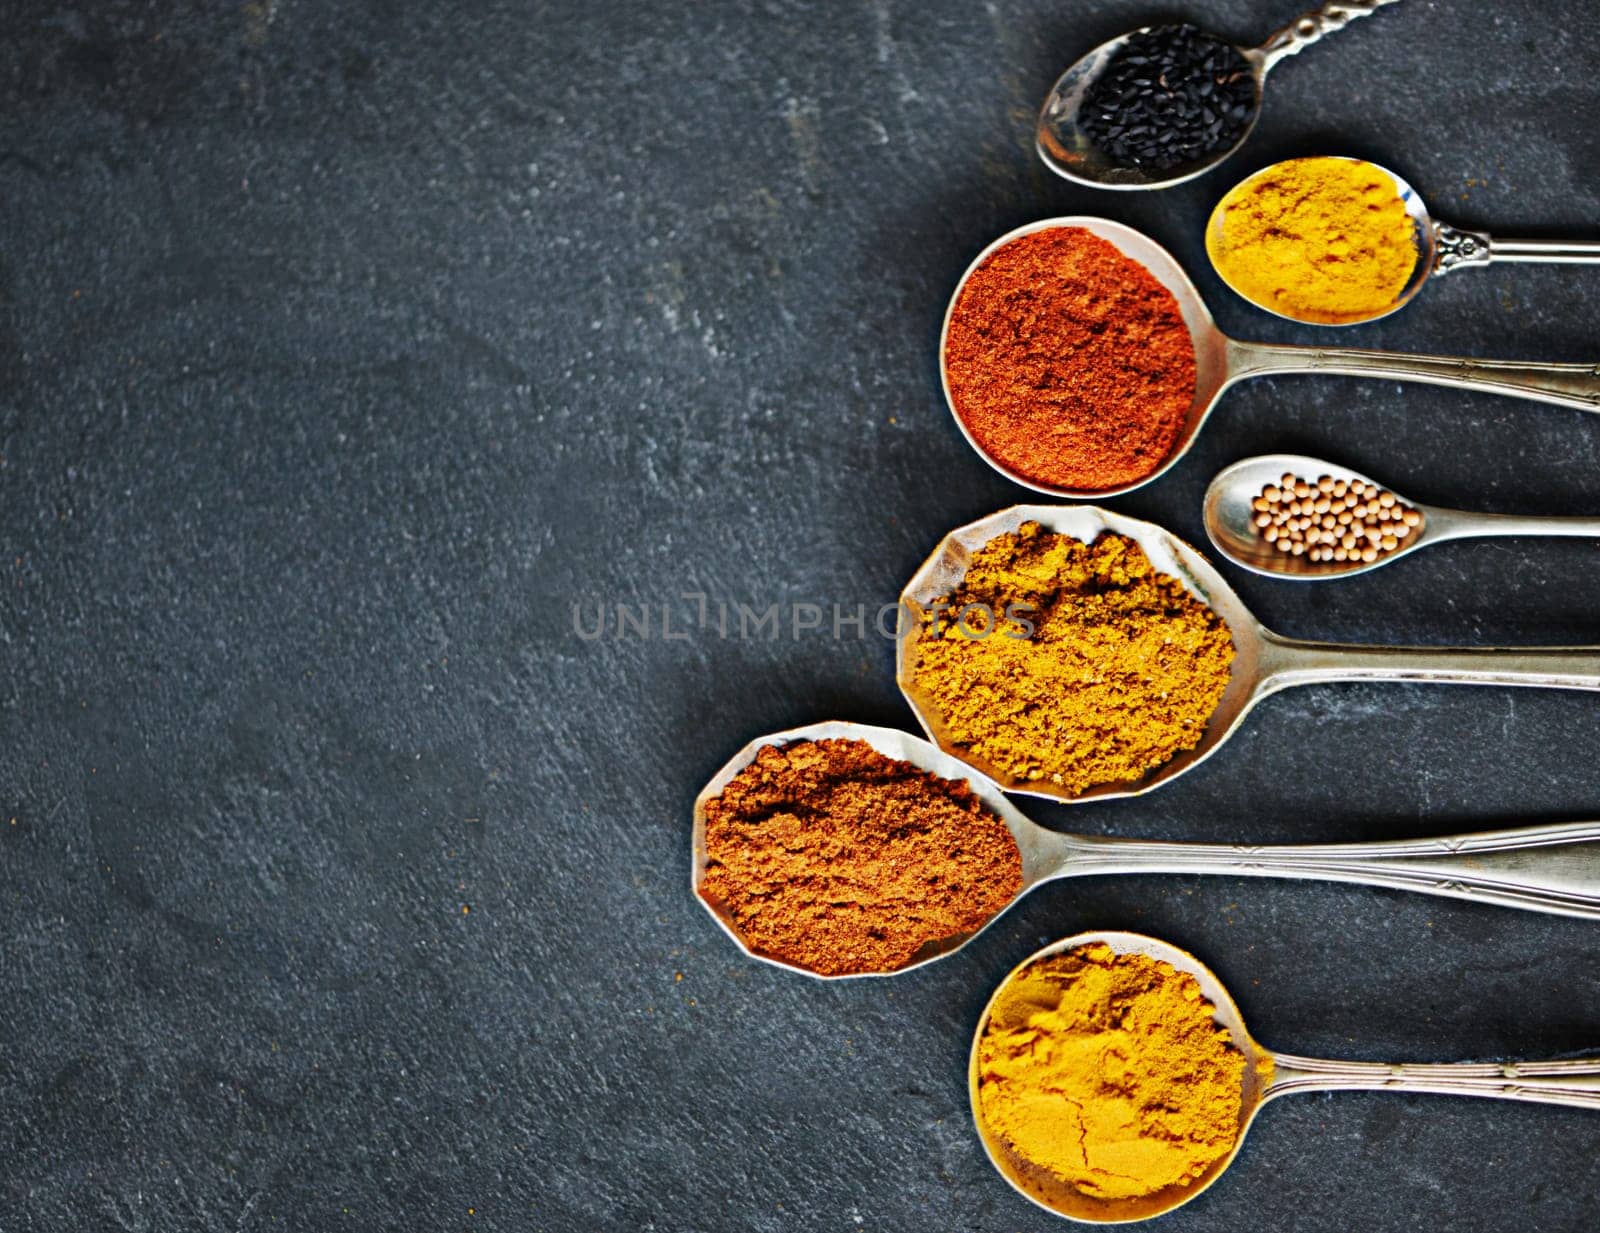 Spoon, powder and group of spices by dark background for cooking dinner, health and nutrition. Turmeric, chilli and seeds on black surface with zoom for Oriental food, antioxidant and spicy cuisine by YuriArcurs